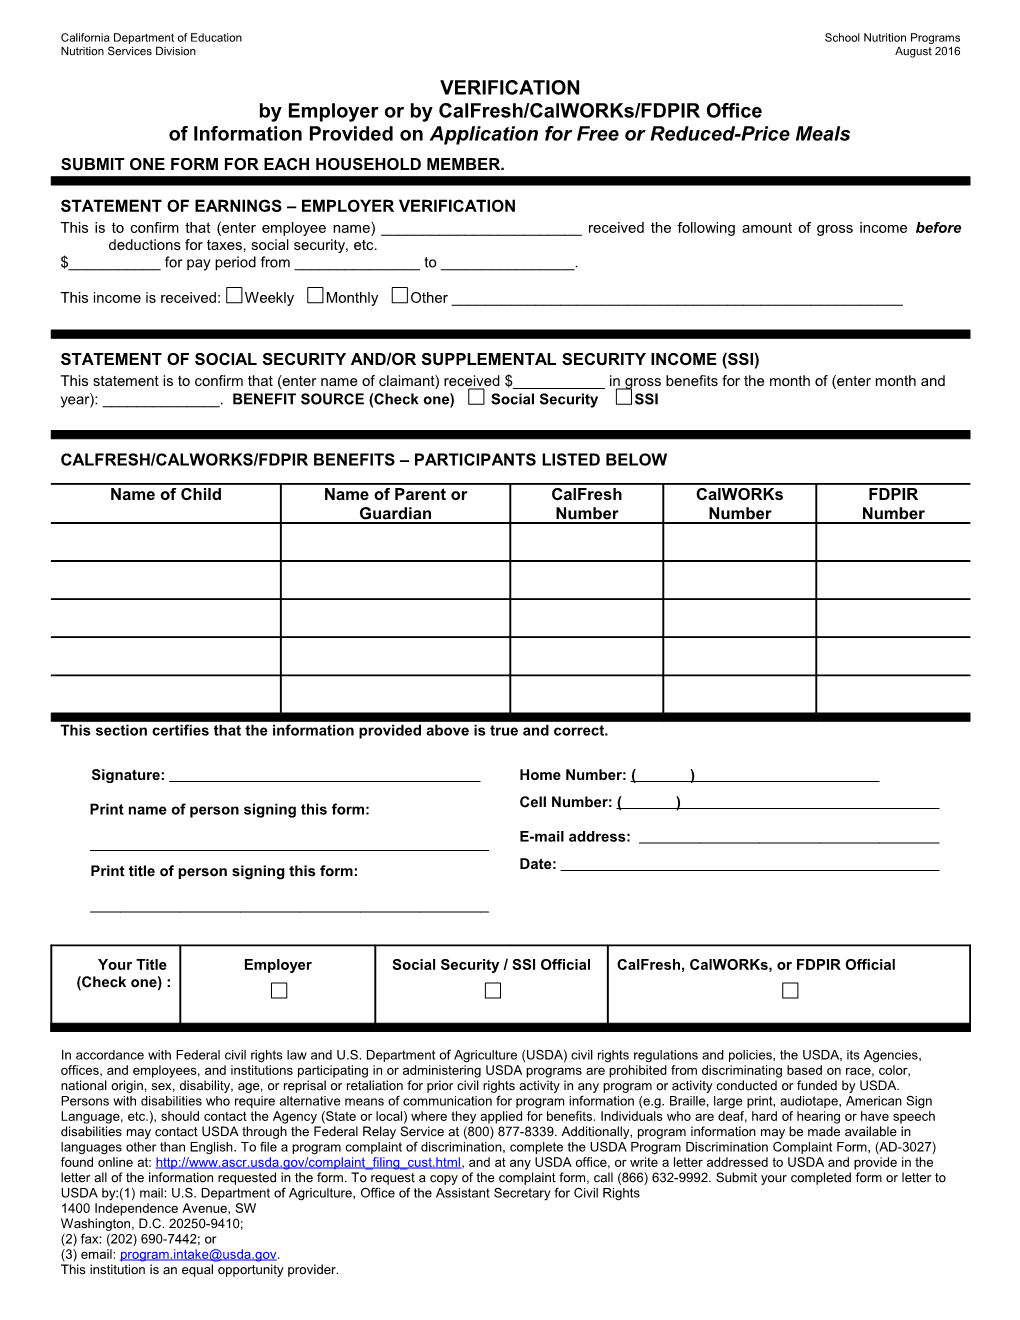 Verification by Employer Or Benefits Office - School Nutrition (CA Dept of Education)